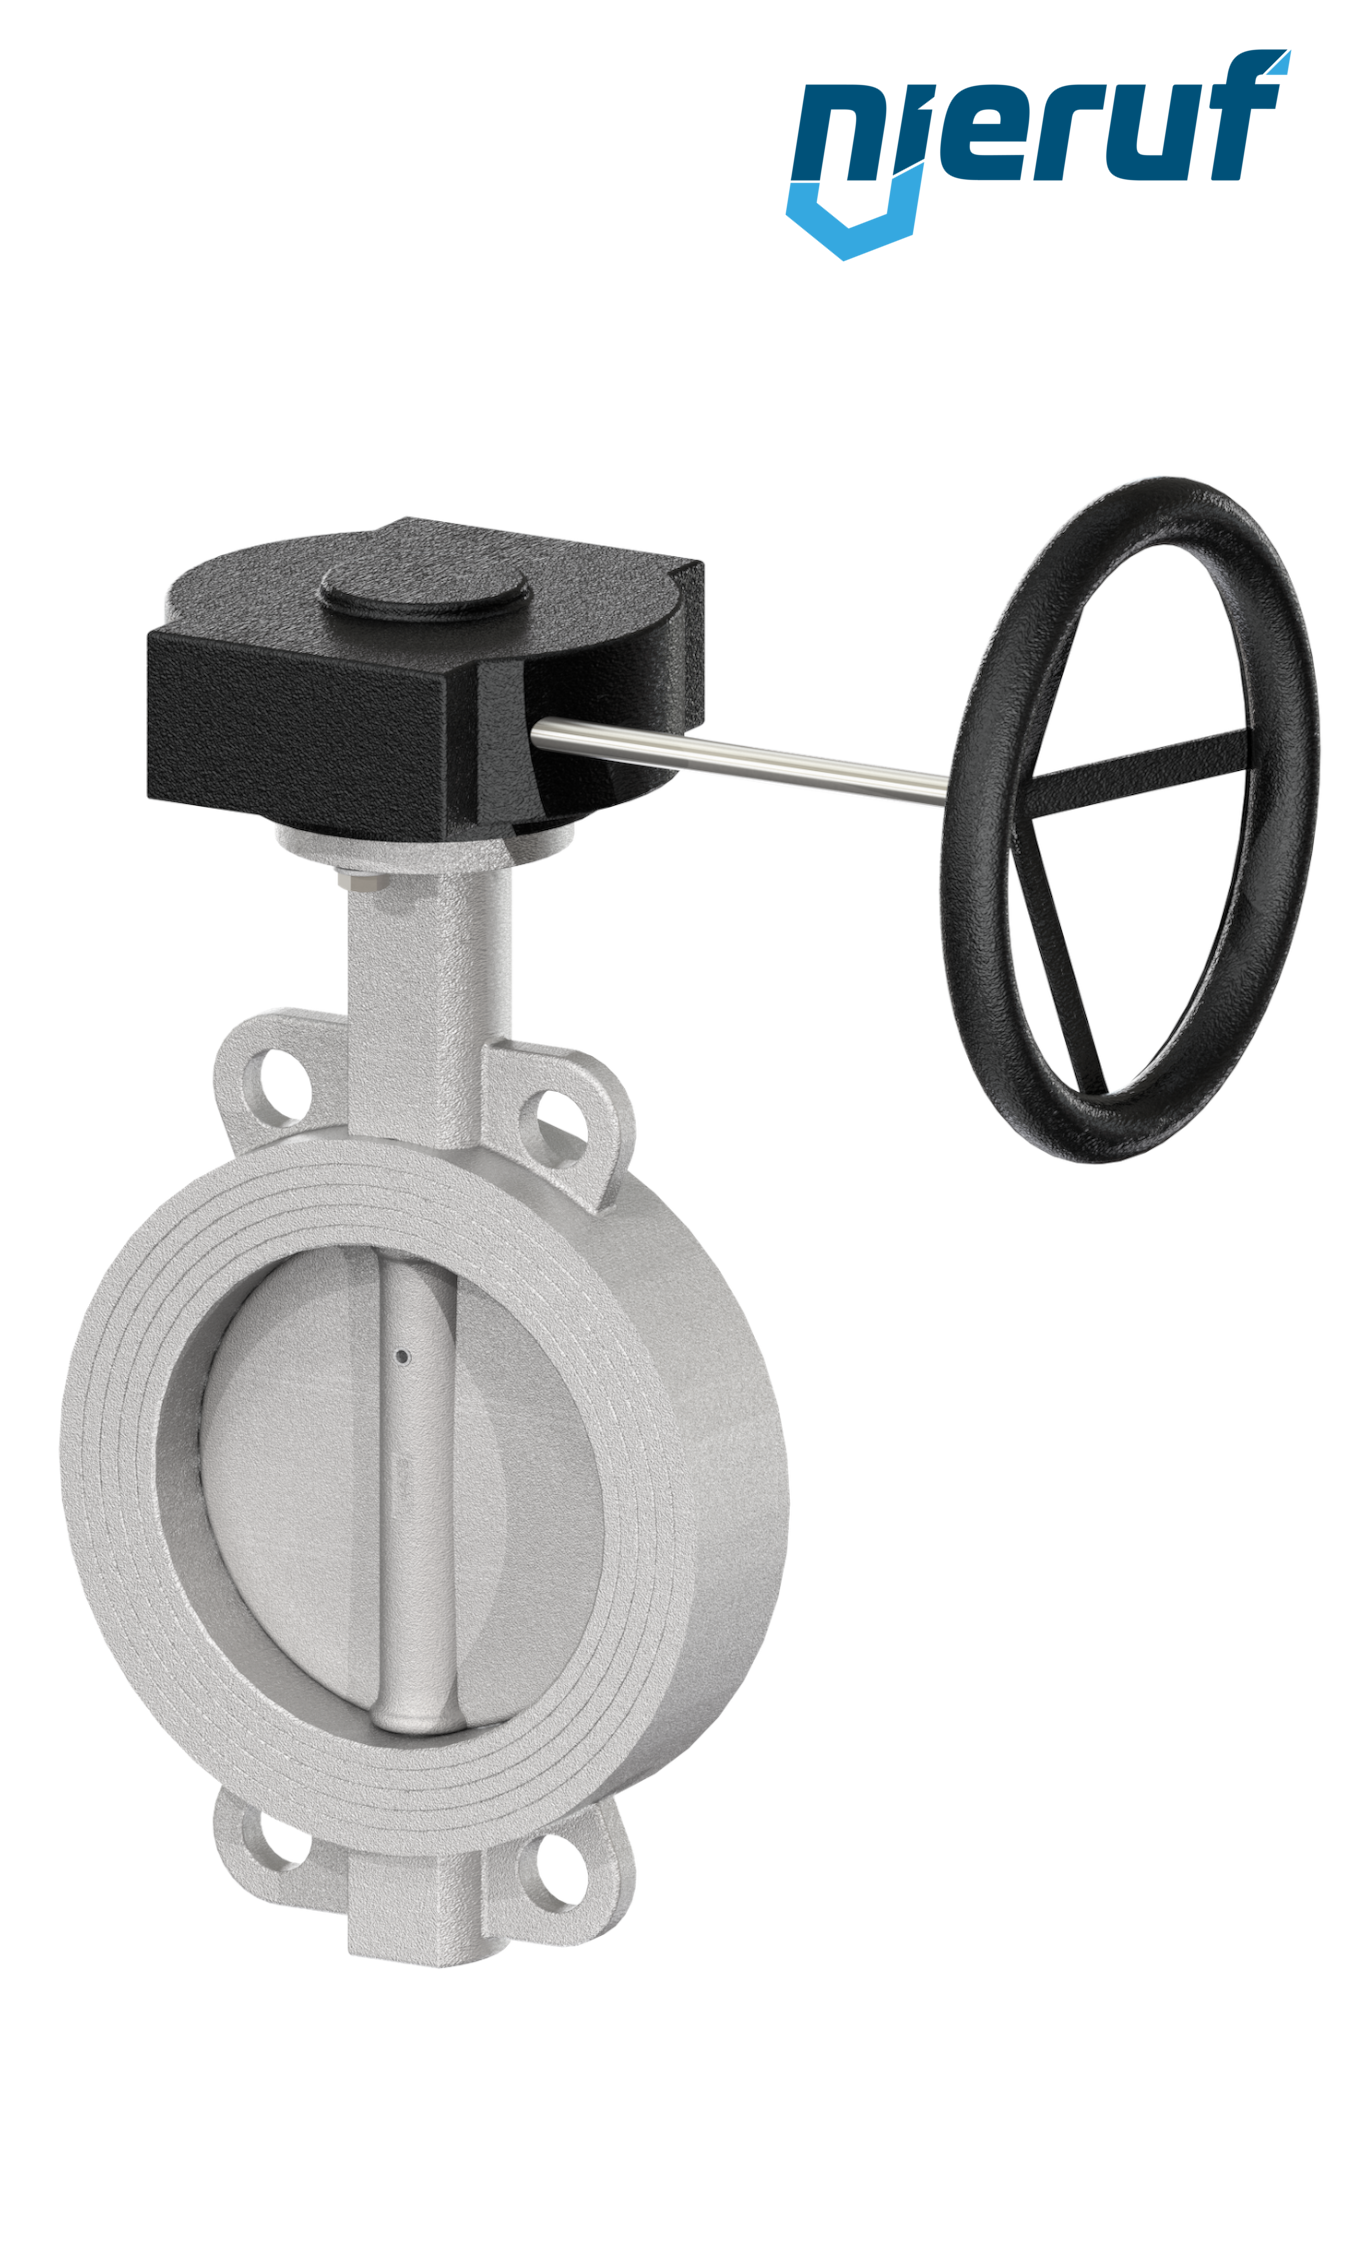 Butterfly-valve-stainless-steel DN250 PN16 AK08 metall gearbox